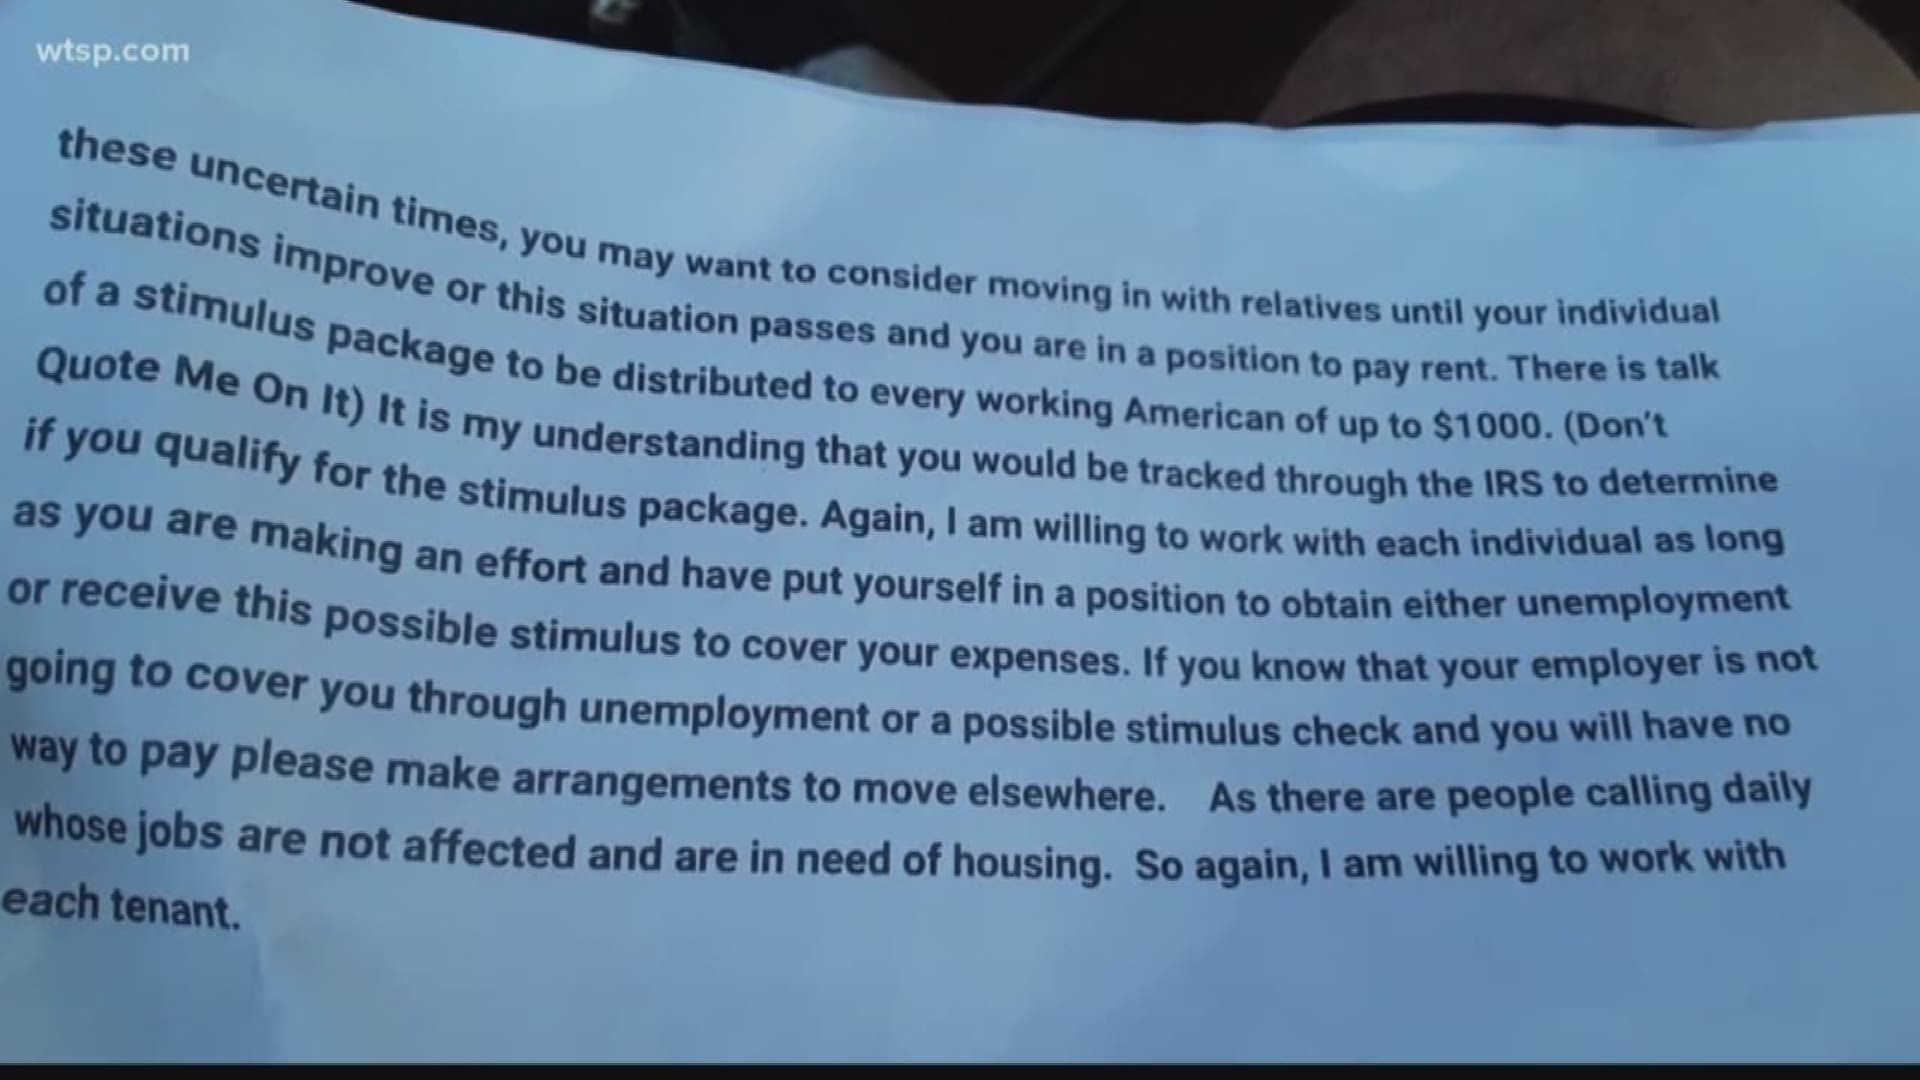 Service industry workers reached out to 10Investigates for help.